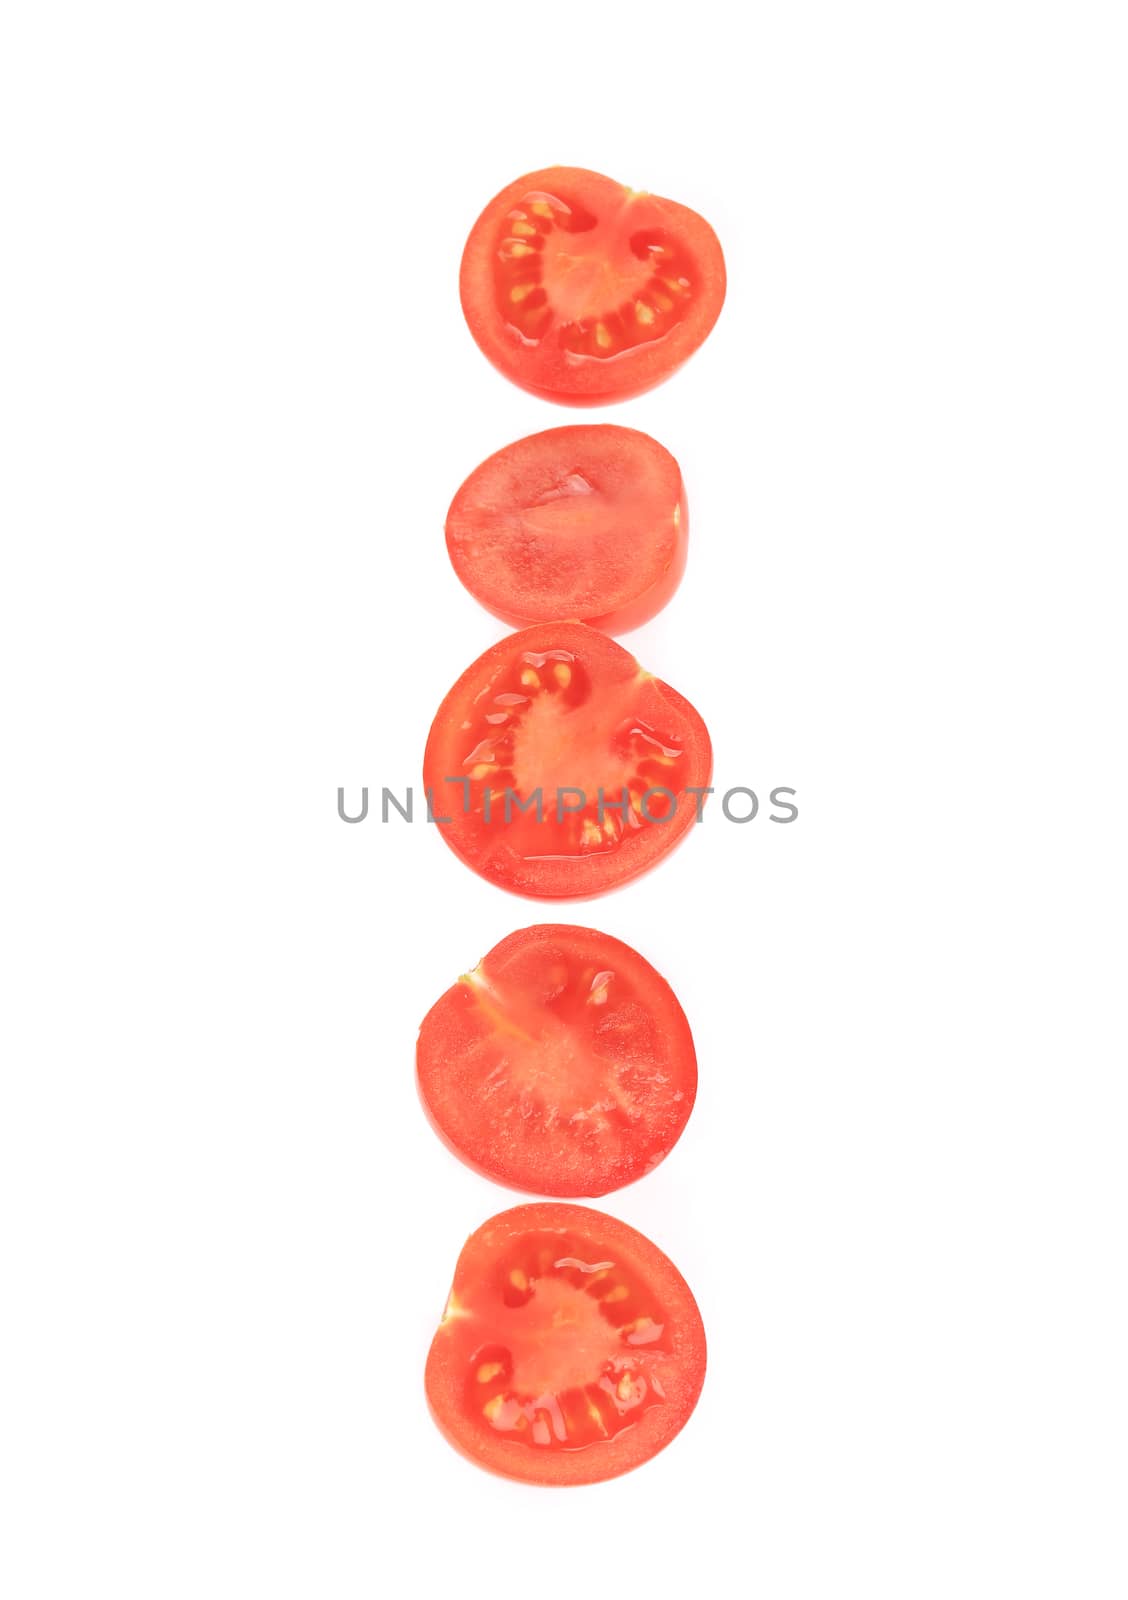 Sliced fresh red tomatoes. Isolated on a white background.